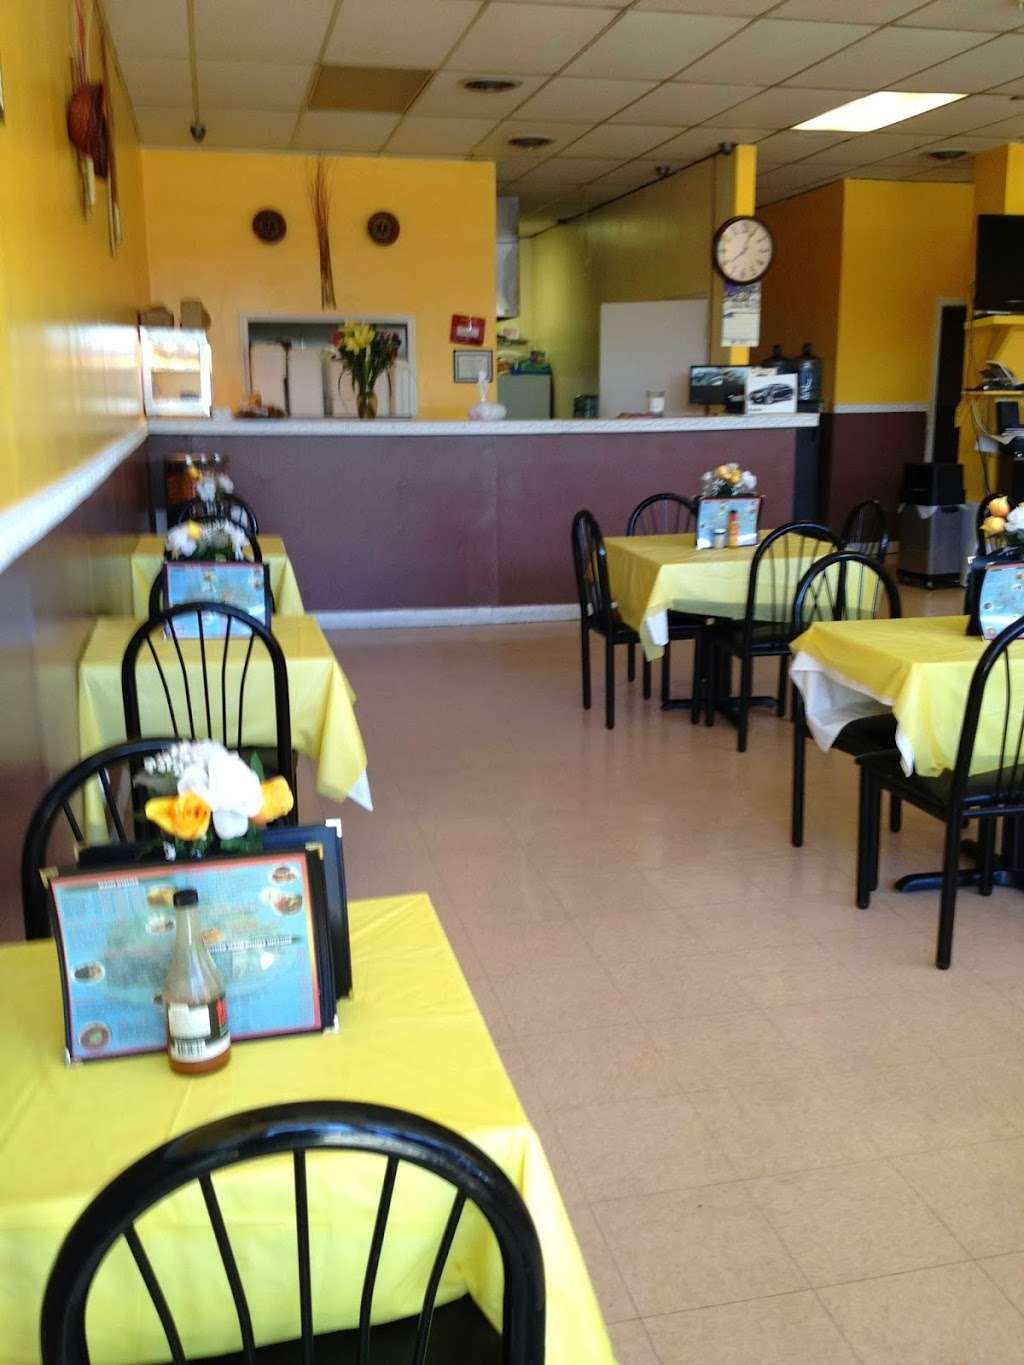 African and Jamaican Kitchen | 125 Chester Ave, Yeadon, PA 19050, USA | Phone: (610) 259-5733